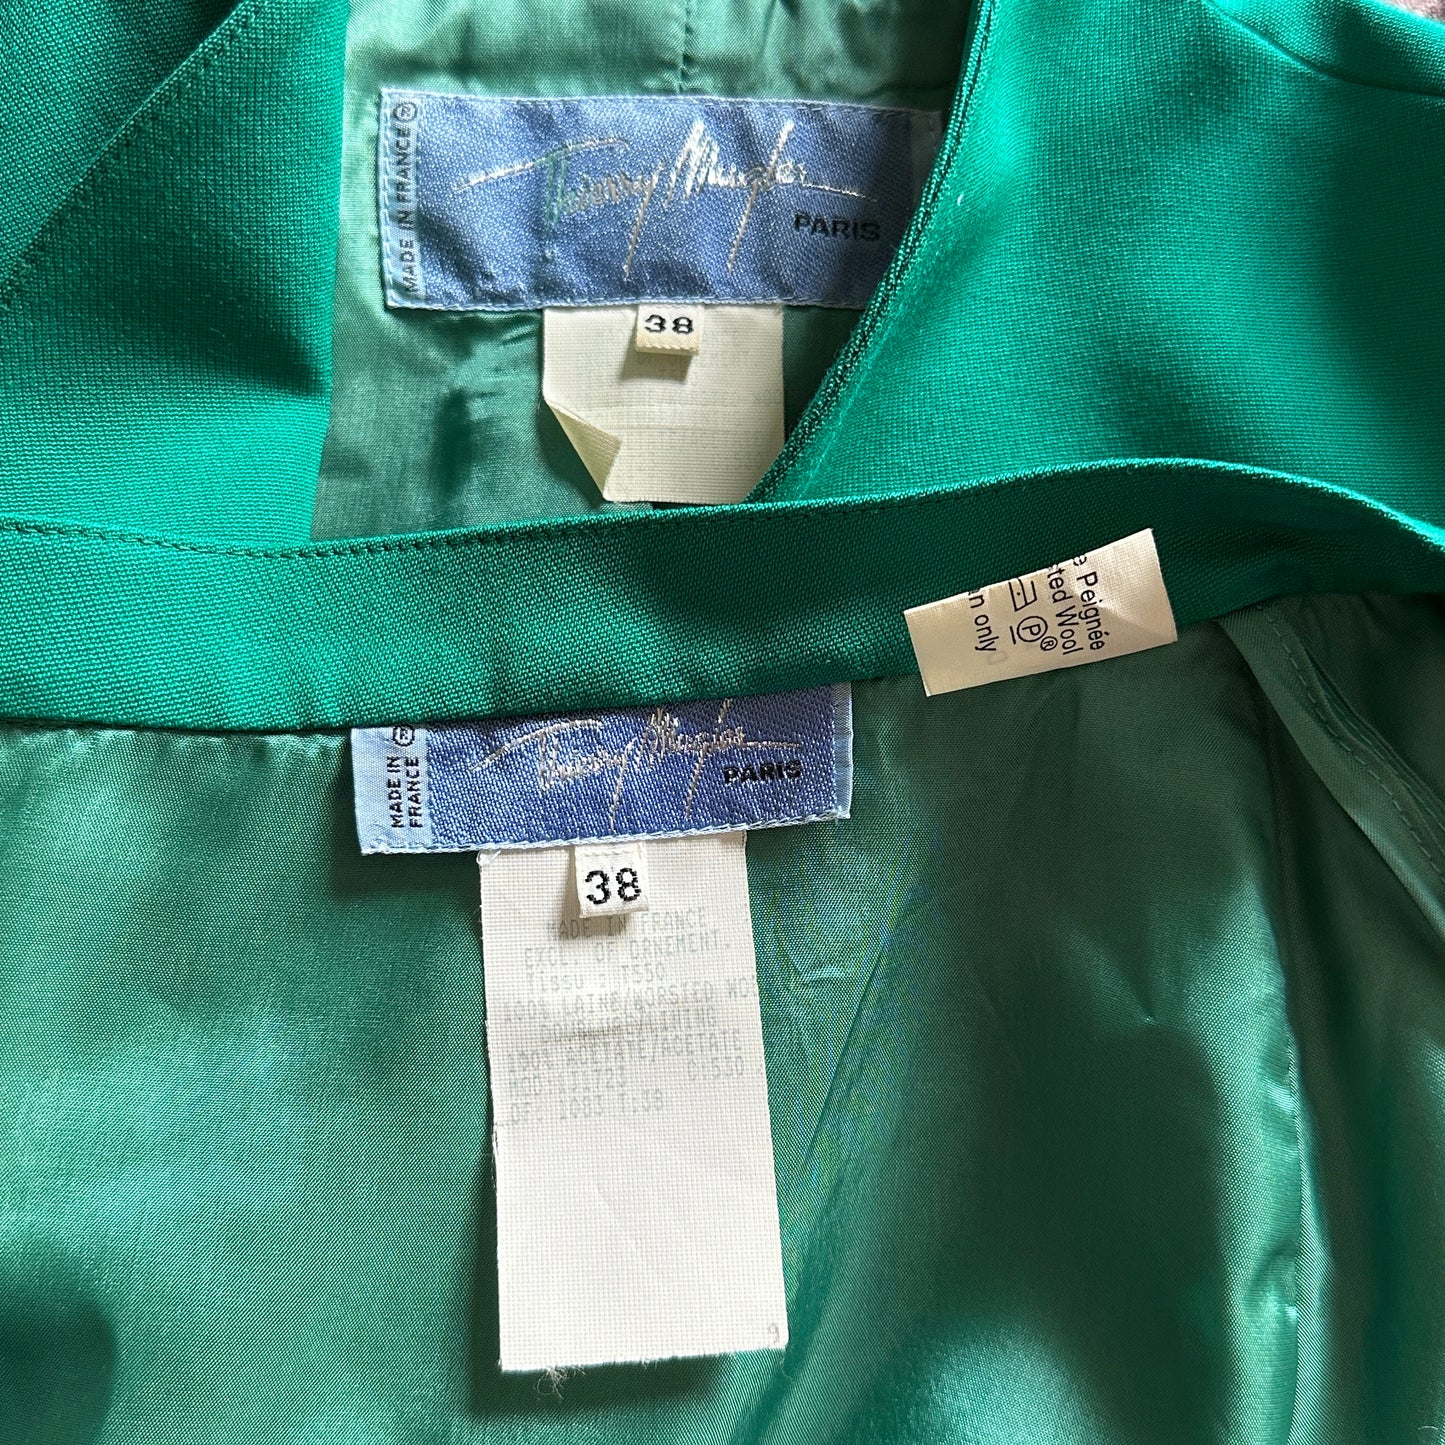 Thierry Mugler Green Bow Detail Contoured Jacket & Skirt Suit